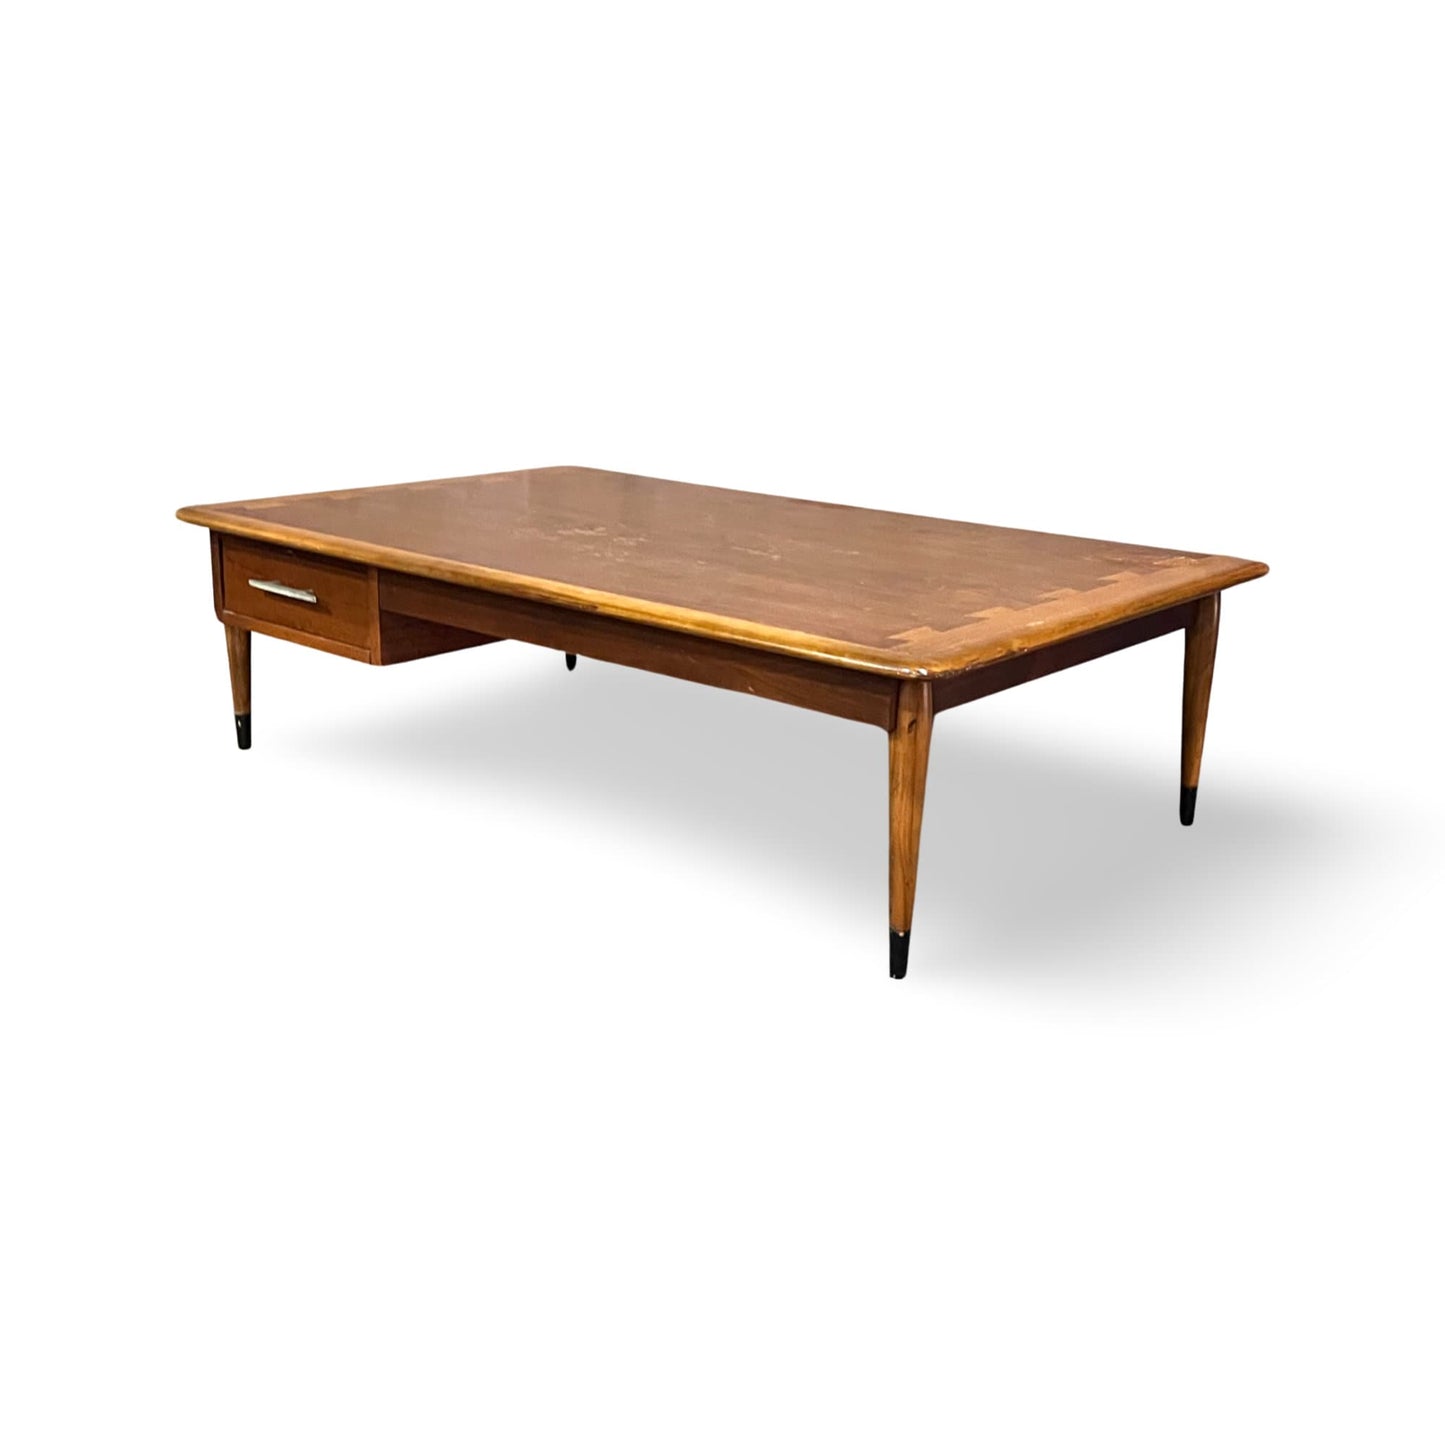 Vintage Plateau Table model 900-32, featuring a sleek, long drawer.